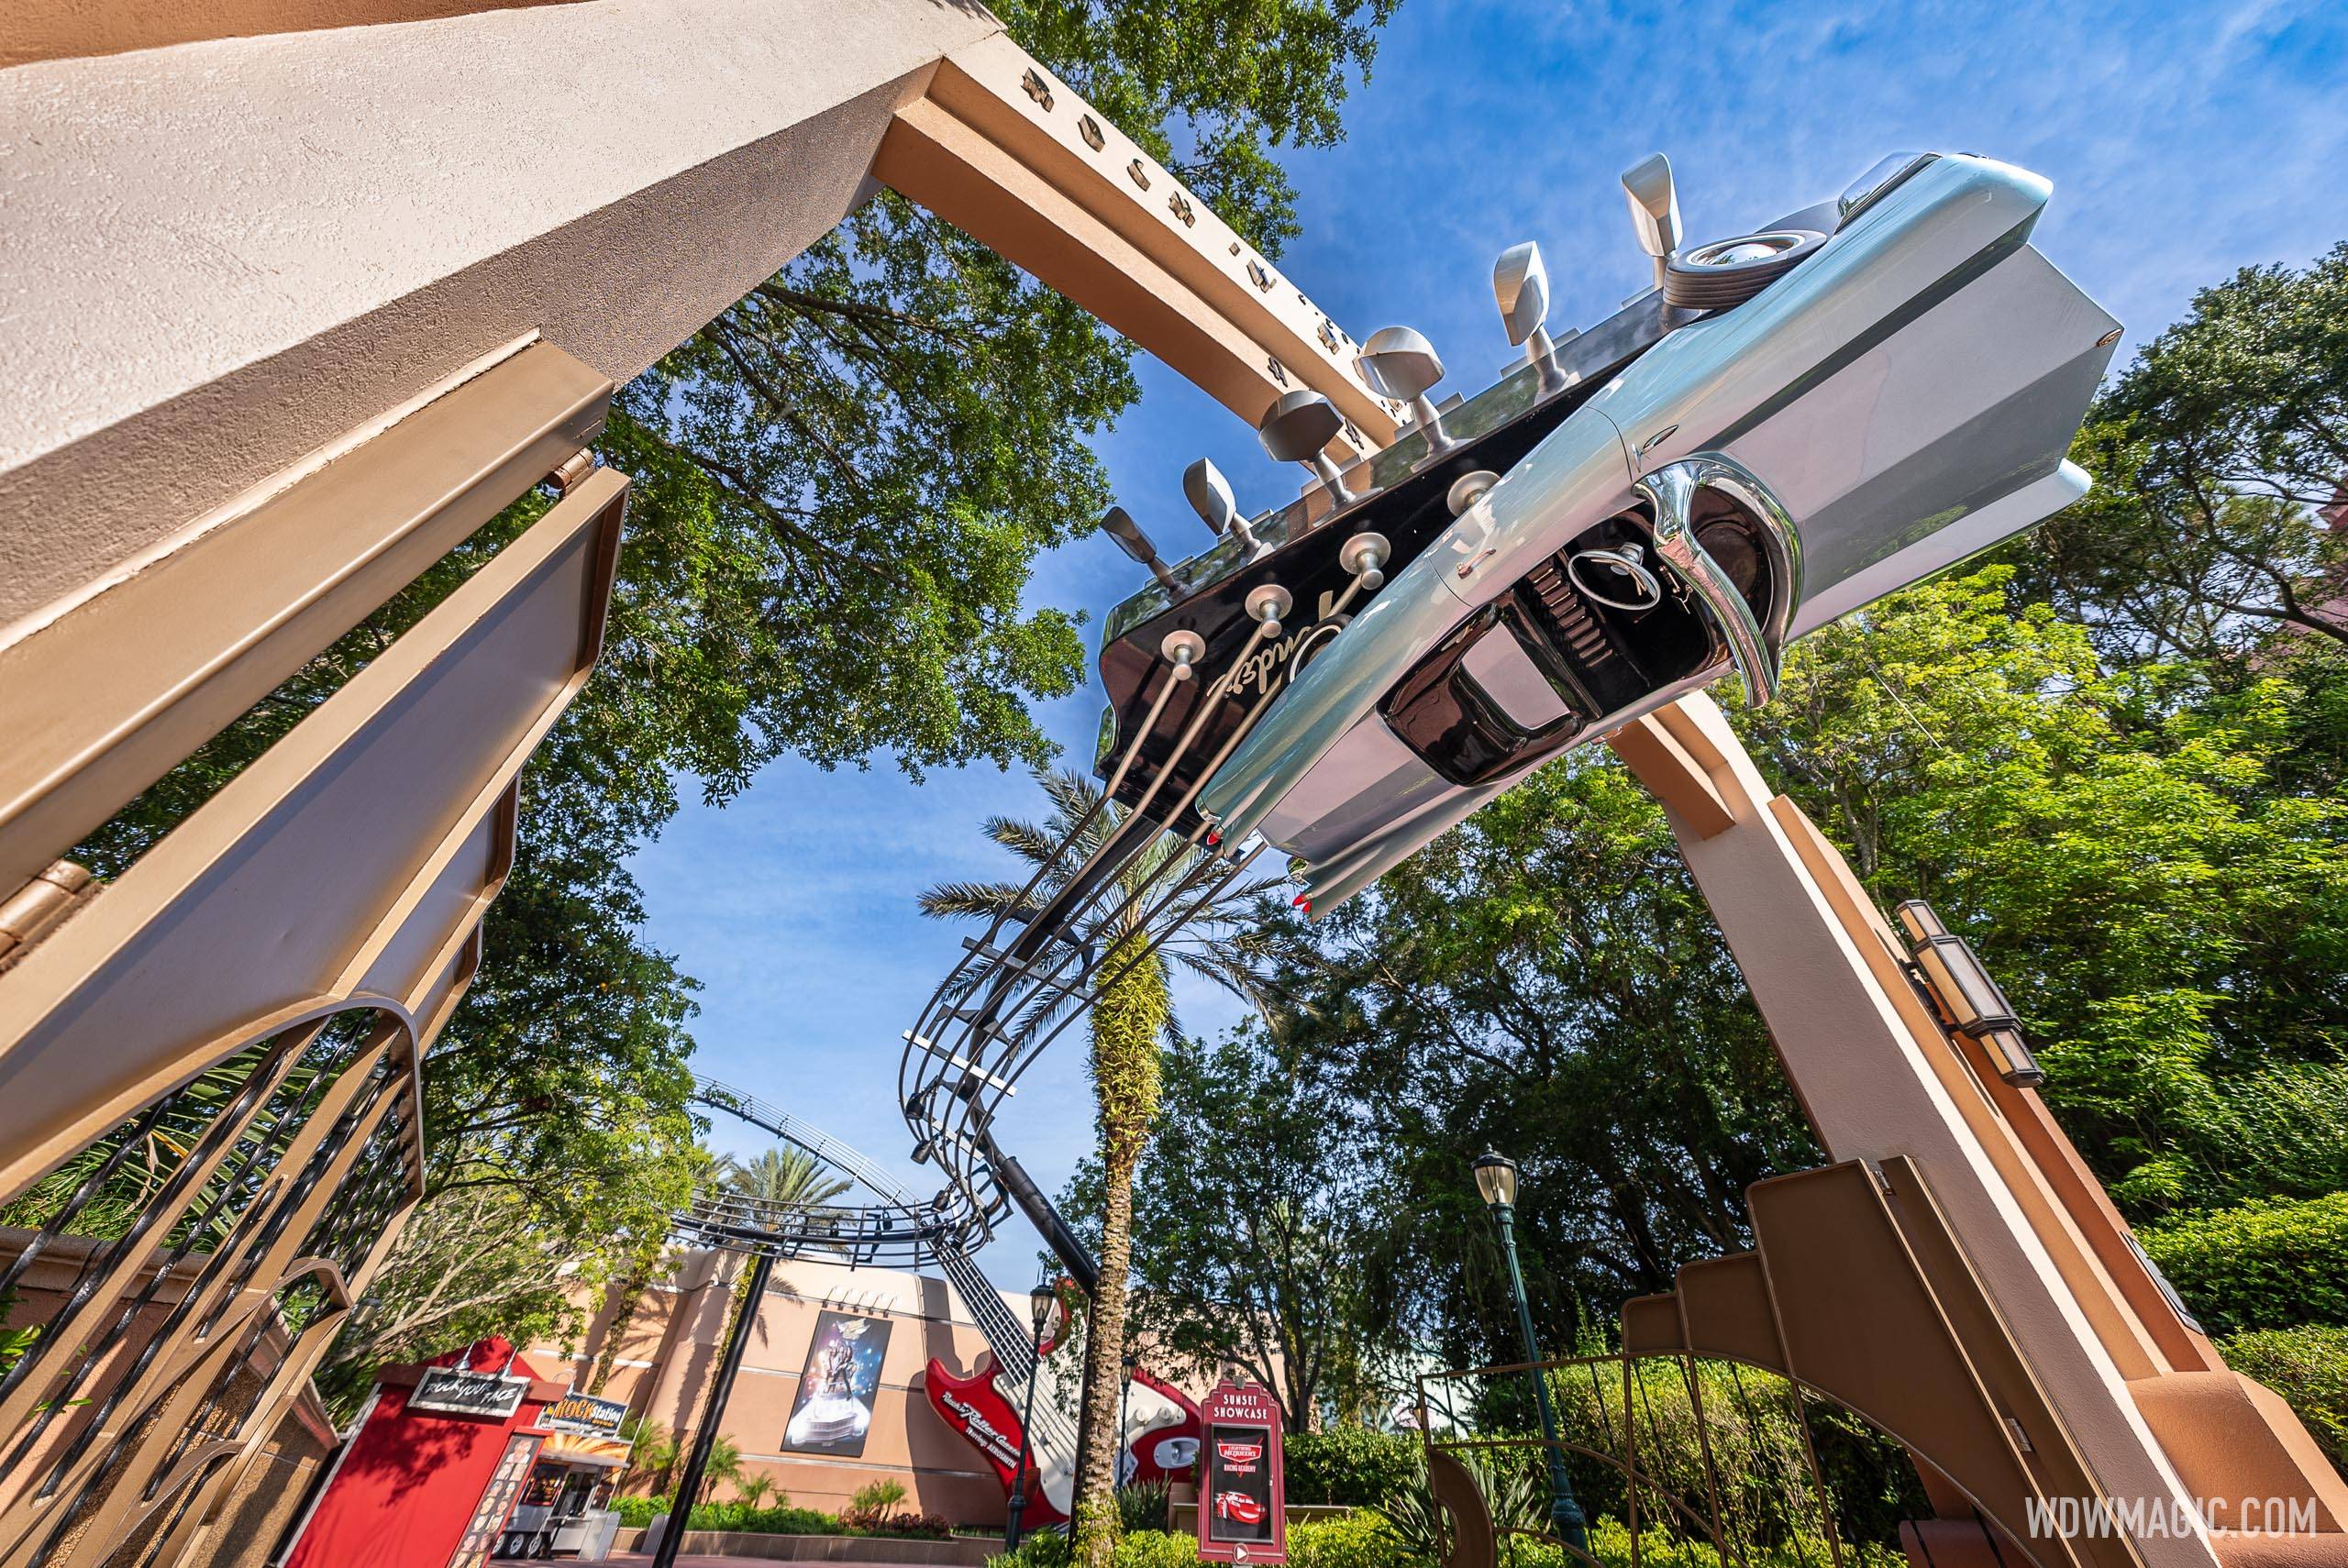 Rock 'n' Roller Coaster at Disney's Hollywood Studios reopens after a 5 day closure